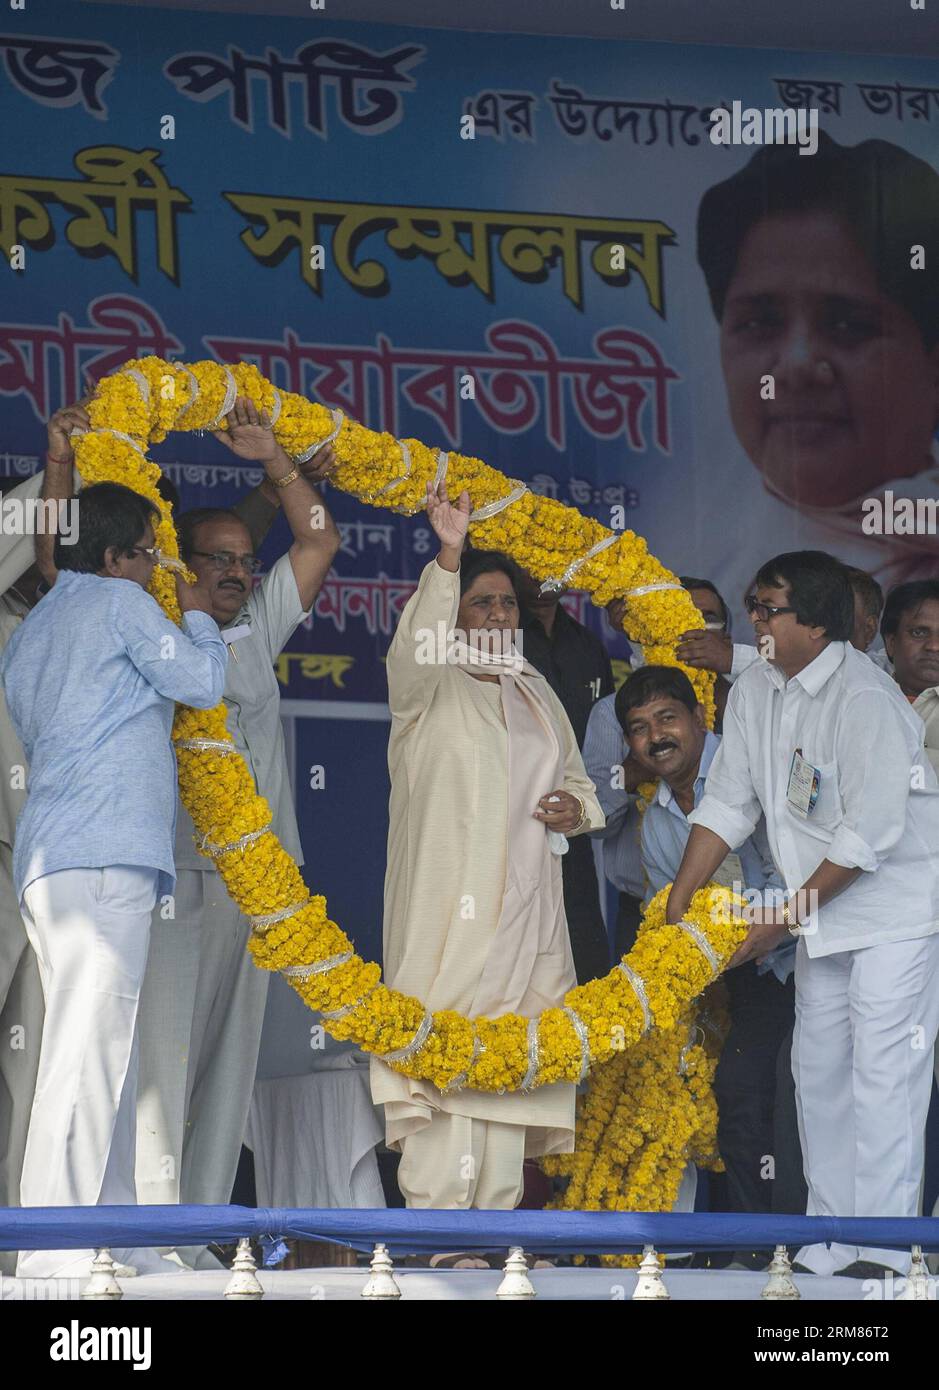 (140331) -- CALCUTTA, March 31, 2014 (Xinhua) -- Former chief minister of the northern state of Uttar Pradesh Mayawati (C) waves to people during a rally in Calcutta, capital of eastern Indian state West Bengal, March 31, 2014. Parliamentary elections in India will be held between April 7 and May 12. (Xinhua/Tumpa Mondal) (zjl) INDIA-CALCUTTA-ELECTION-RALLY PUBLICATIONxNOTxINxCHN   Calcutta March 31 2014 XINHUA Former Chief Ministers of The Northern State of Uttar Pradesh Mayawati C Waves to Celebrities during a Rally in Calcutta Capital of Eastern Indian State WEST Bengal March 31 2014 Parlia Stock Photo